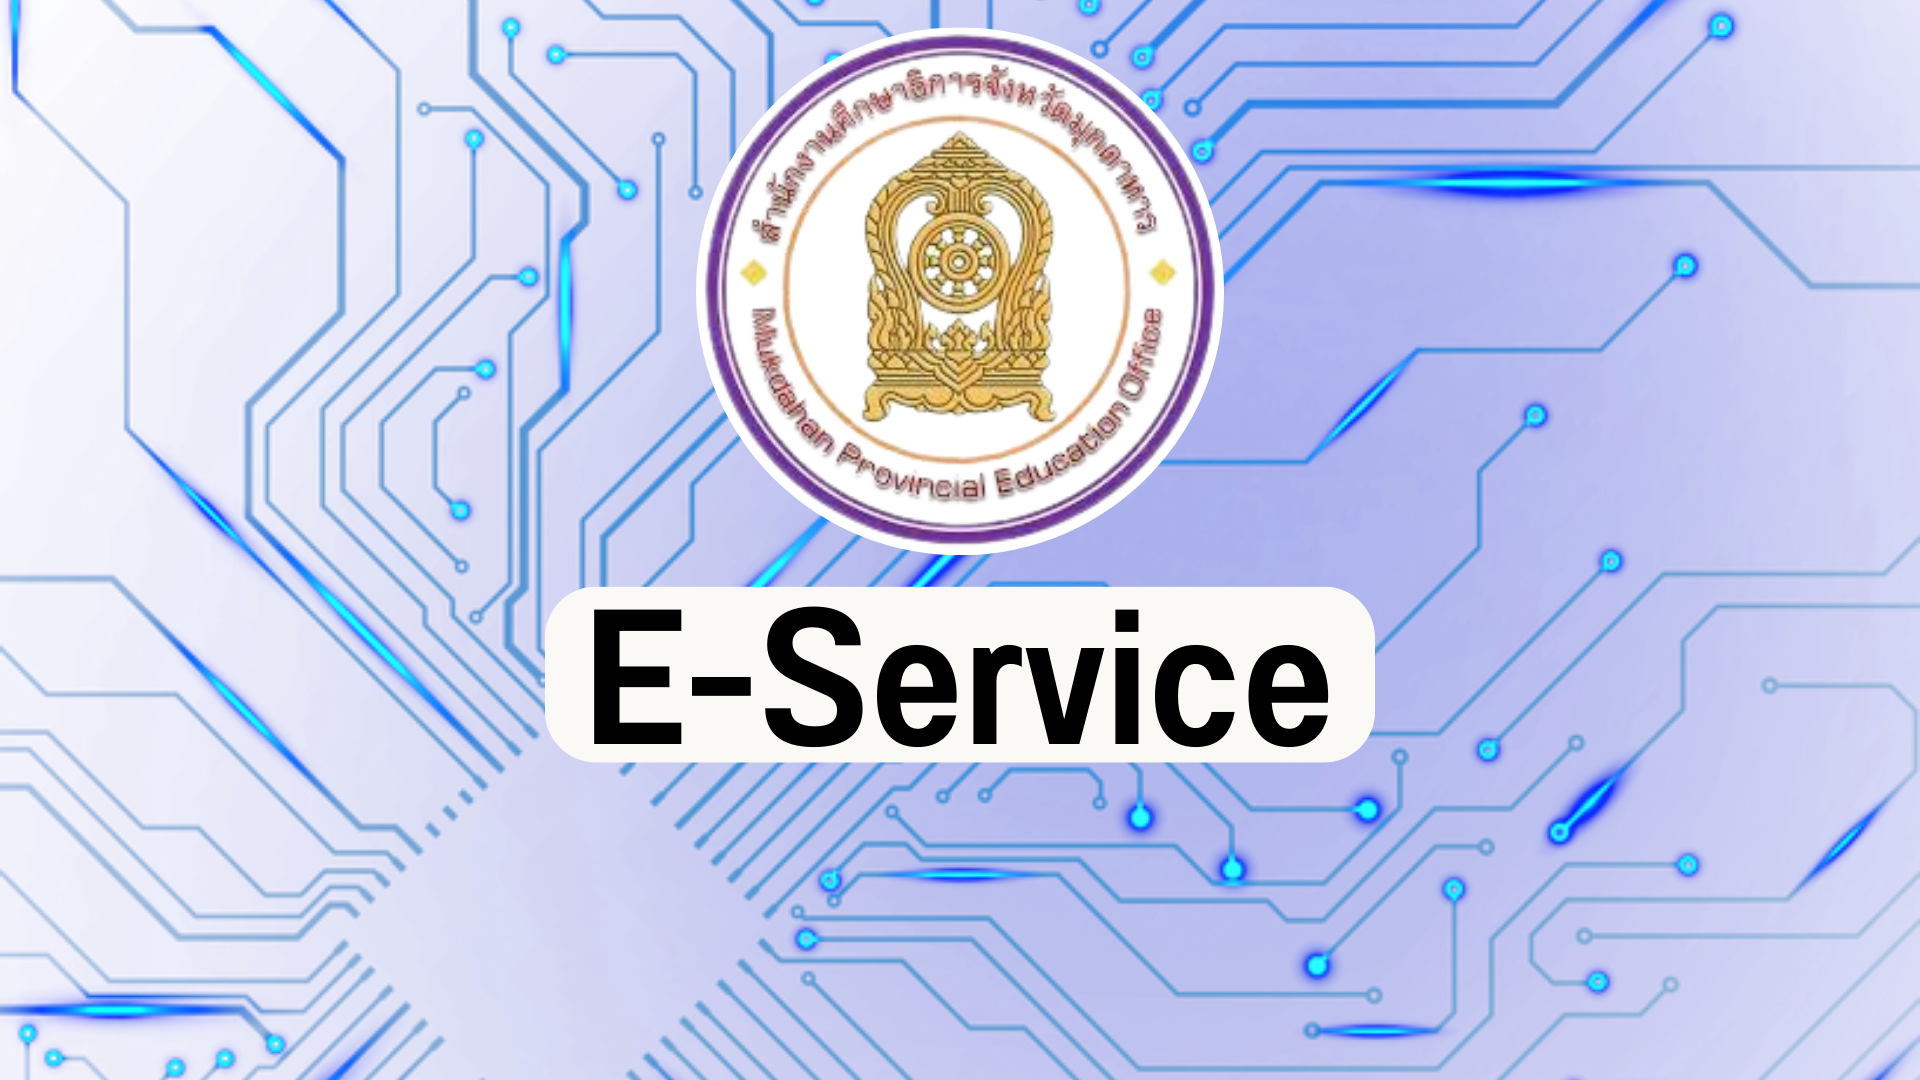 http://www.mpeo.go.th/ms/eservice